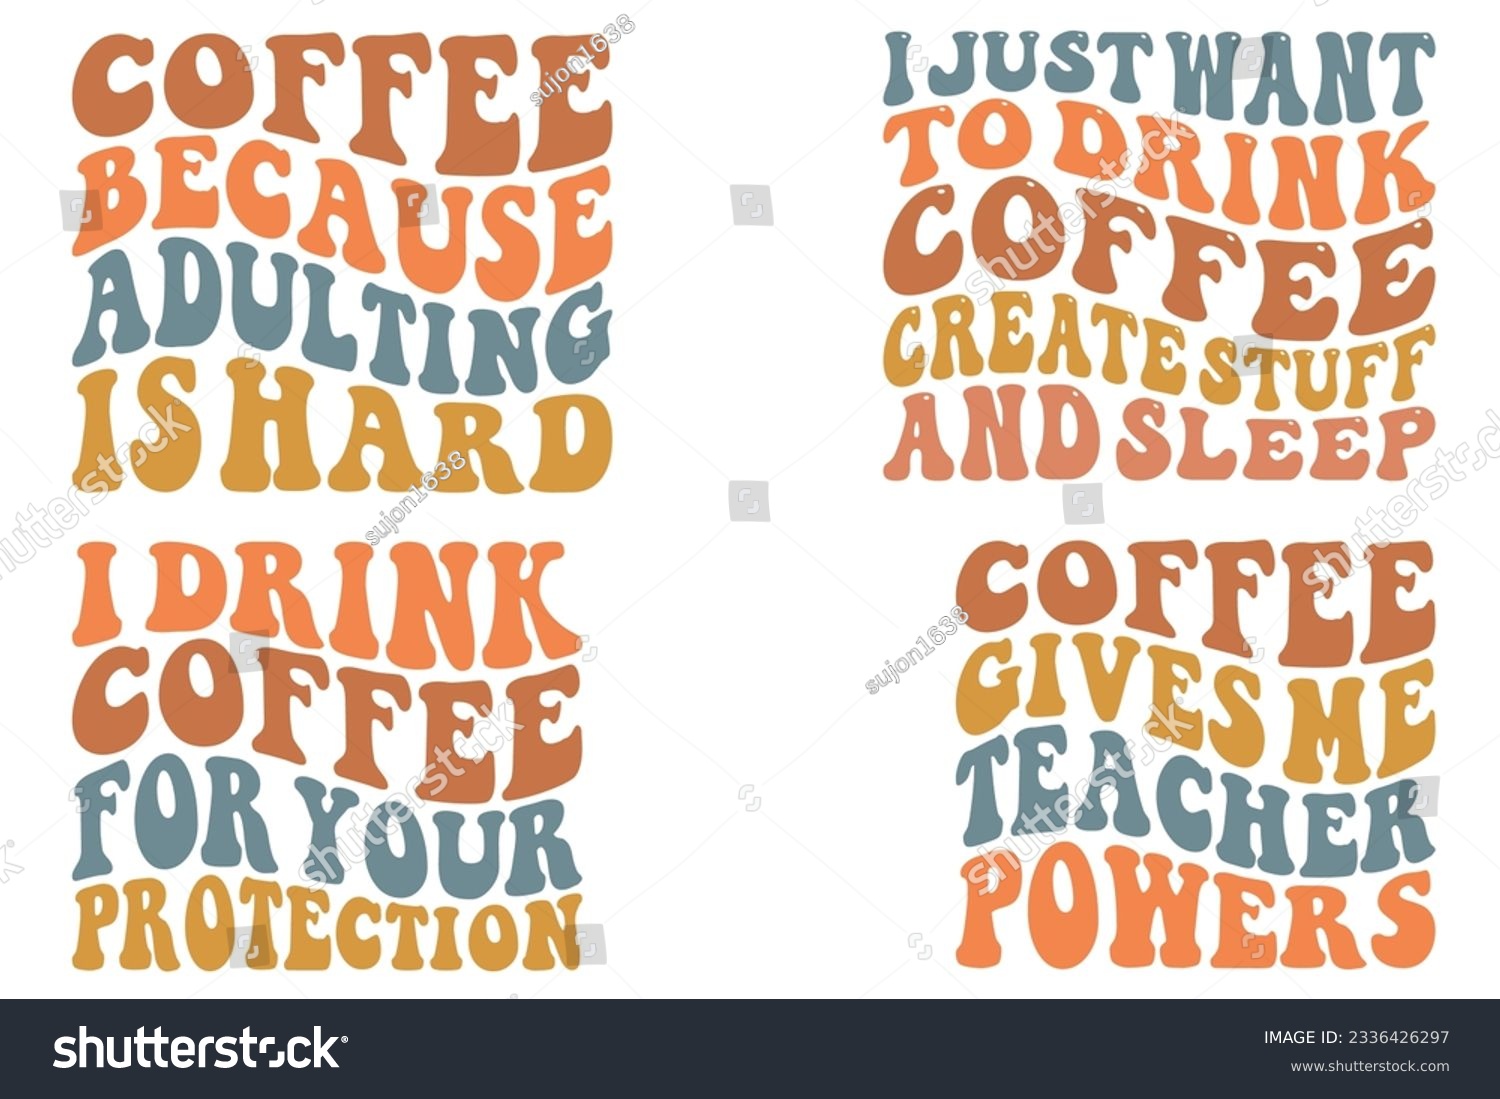 SVG of I Just Want To Drink Coffee Create Stuff And Sleep, Coffee Because Adulting is Hard, I Drink Coffee For Your Protection, Coffee Gives Me Teacher Powers retro wavy SVG bundle T-shirt svg